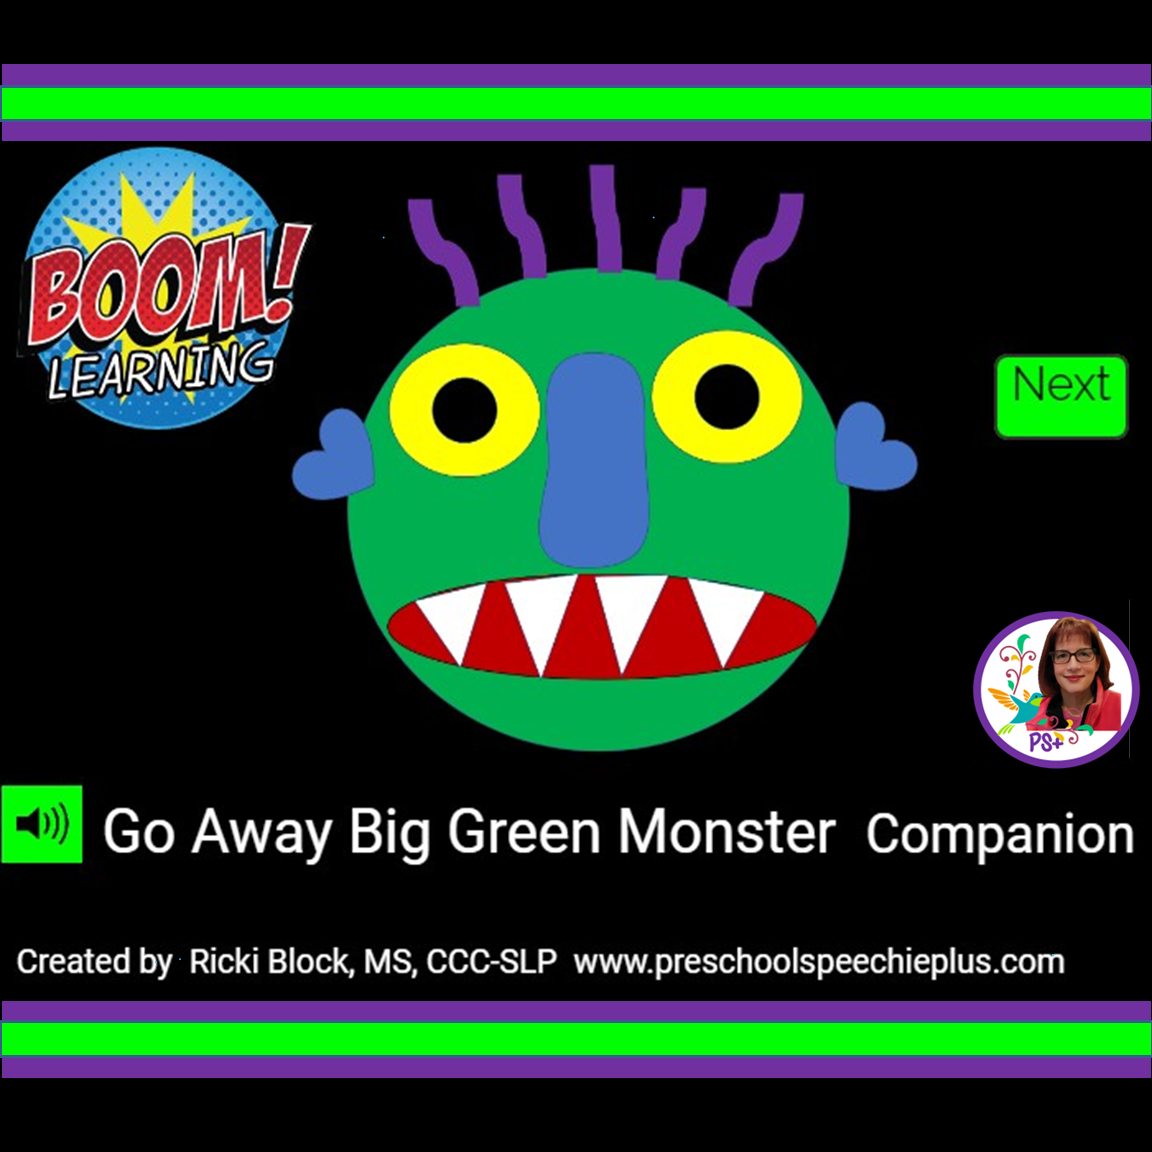 Go away monster cover.png (Copy)